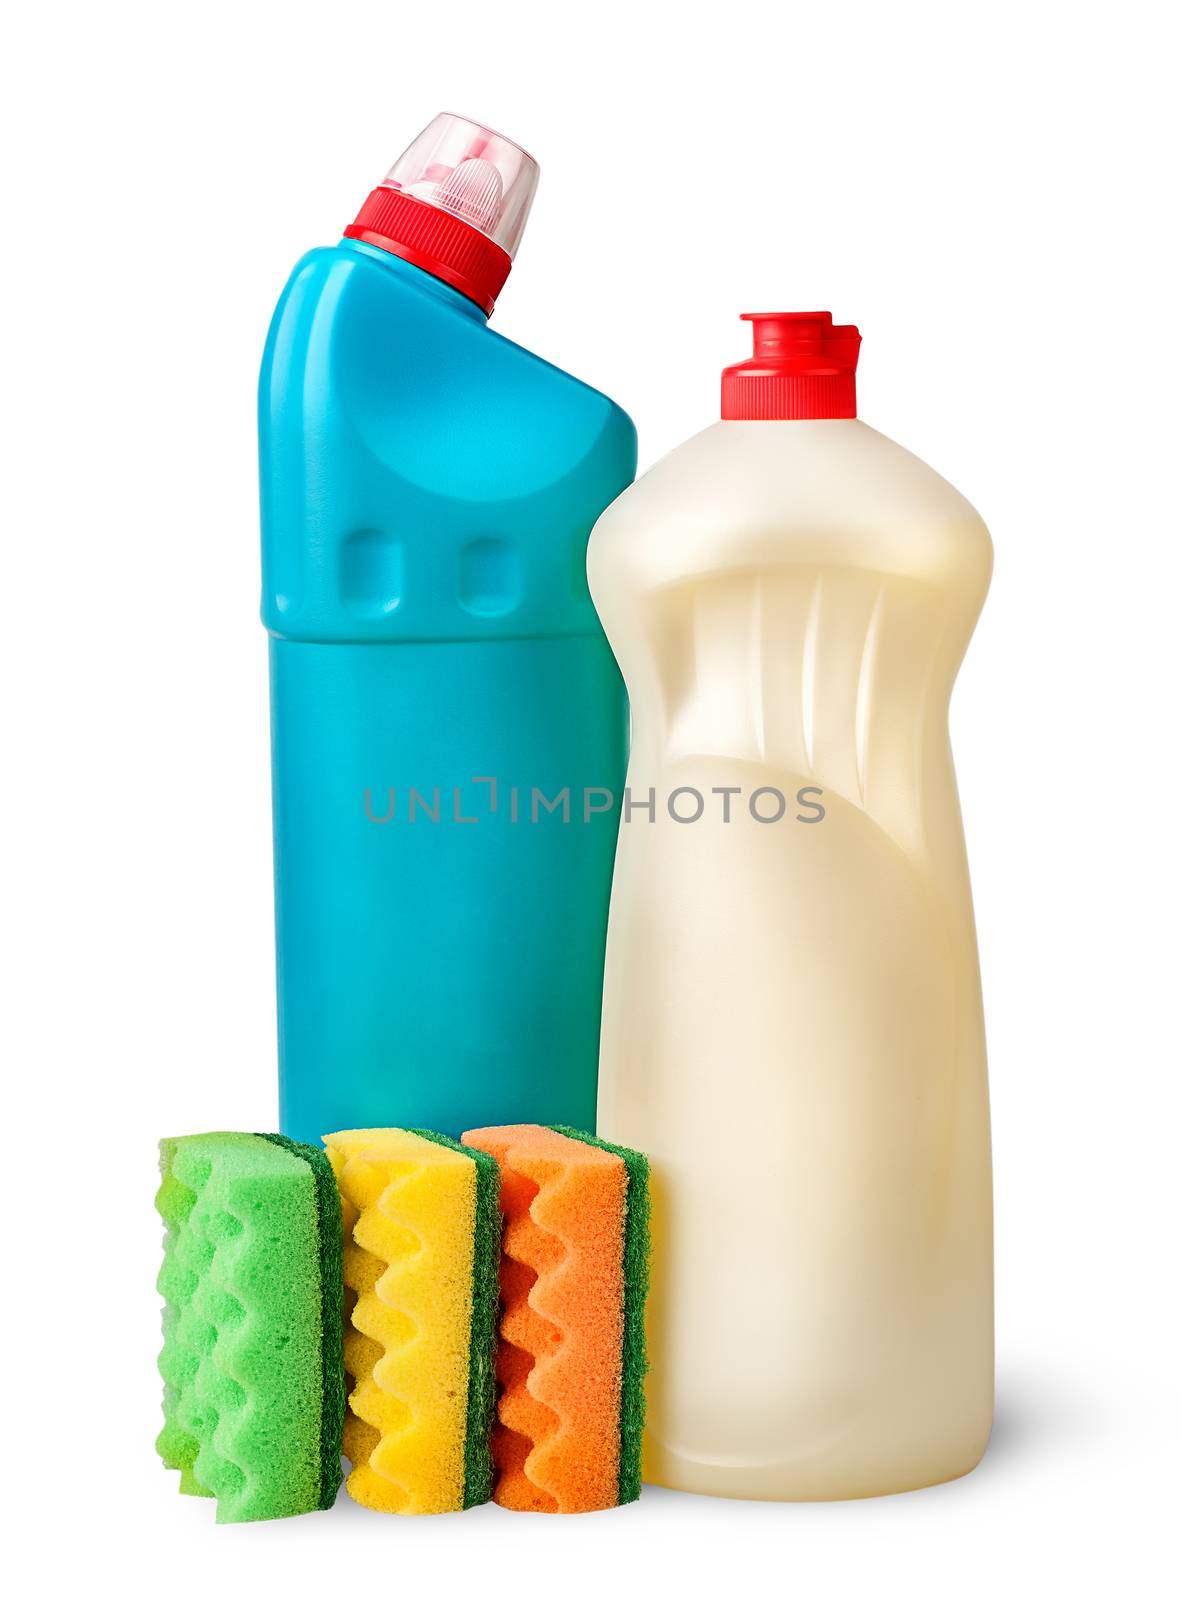 Sponges and detergent by Cipariss